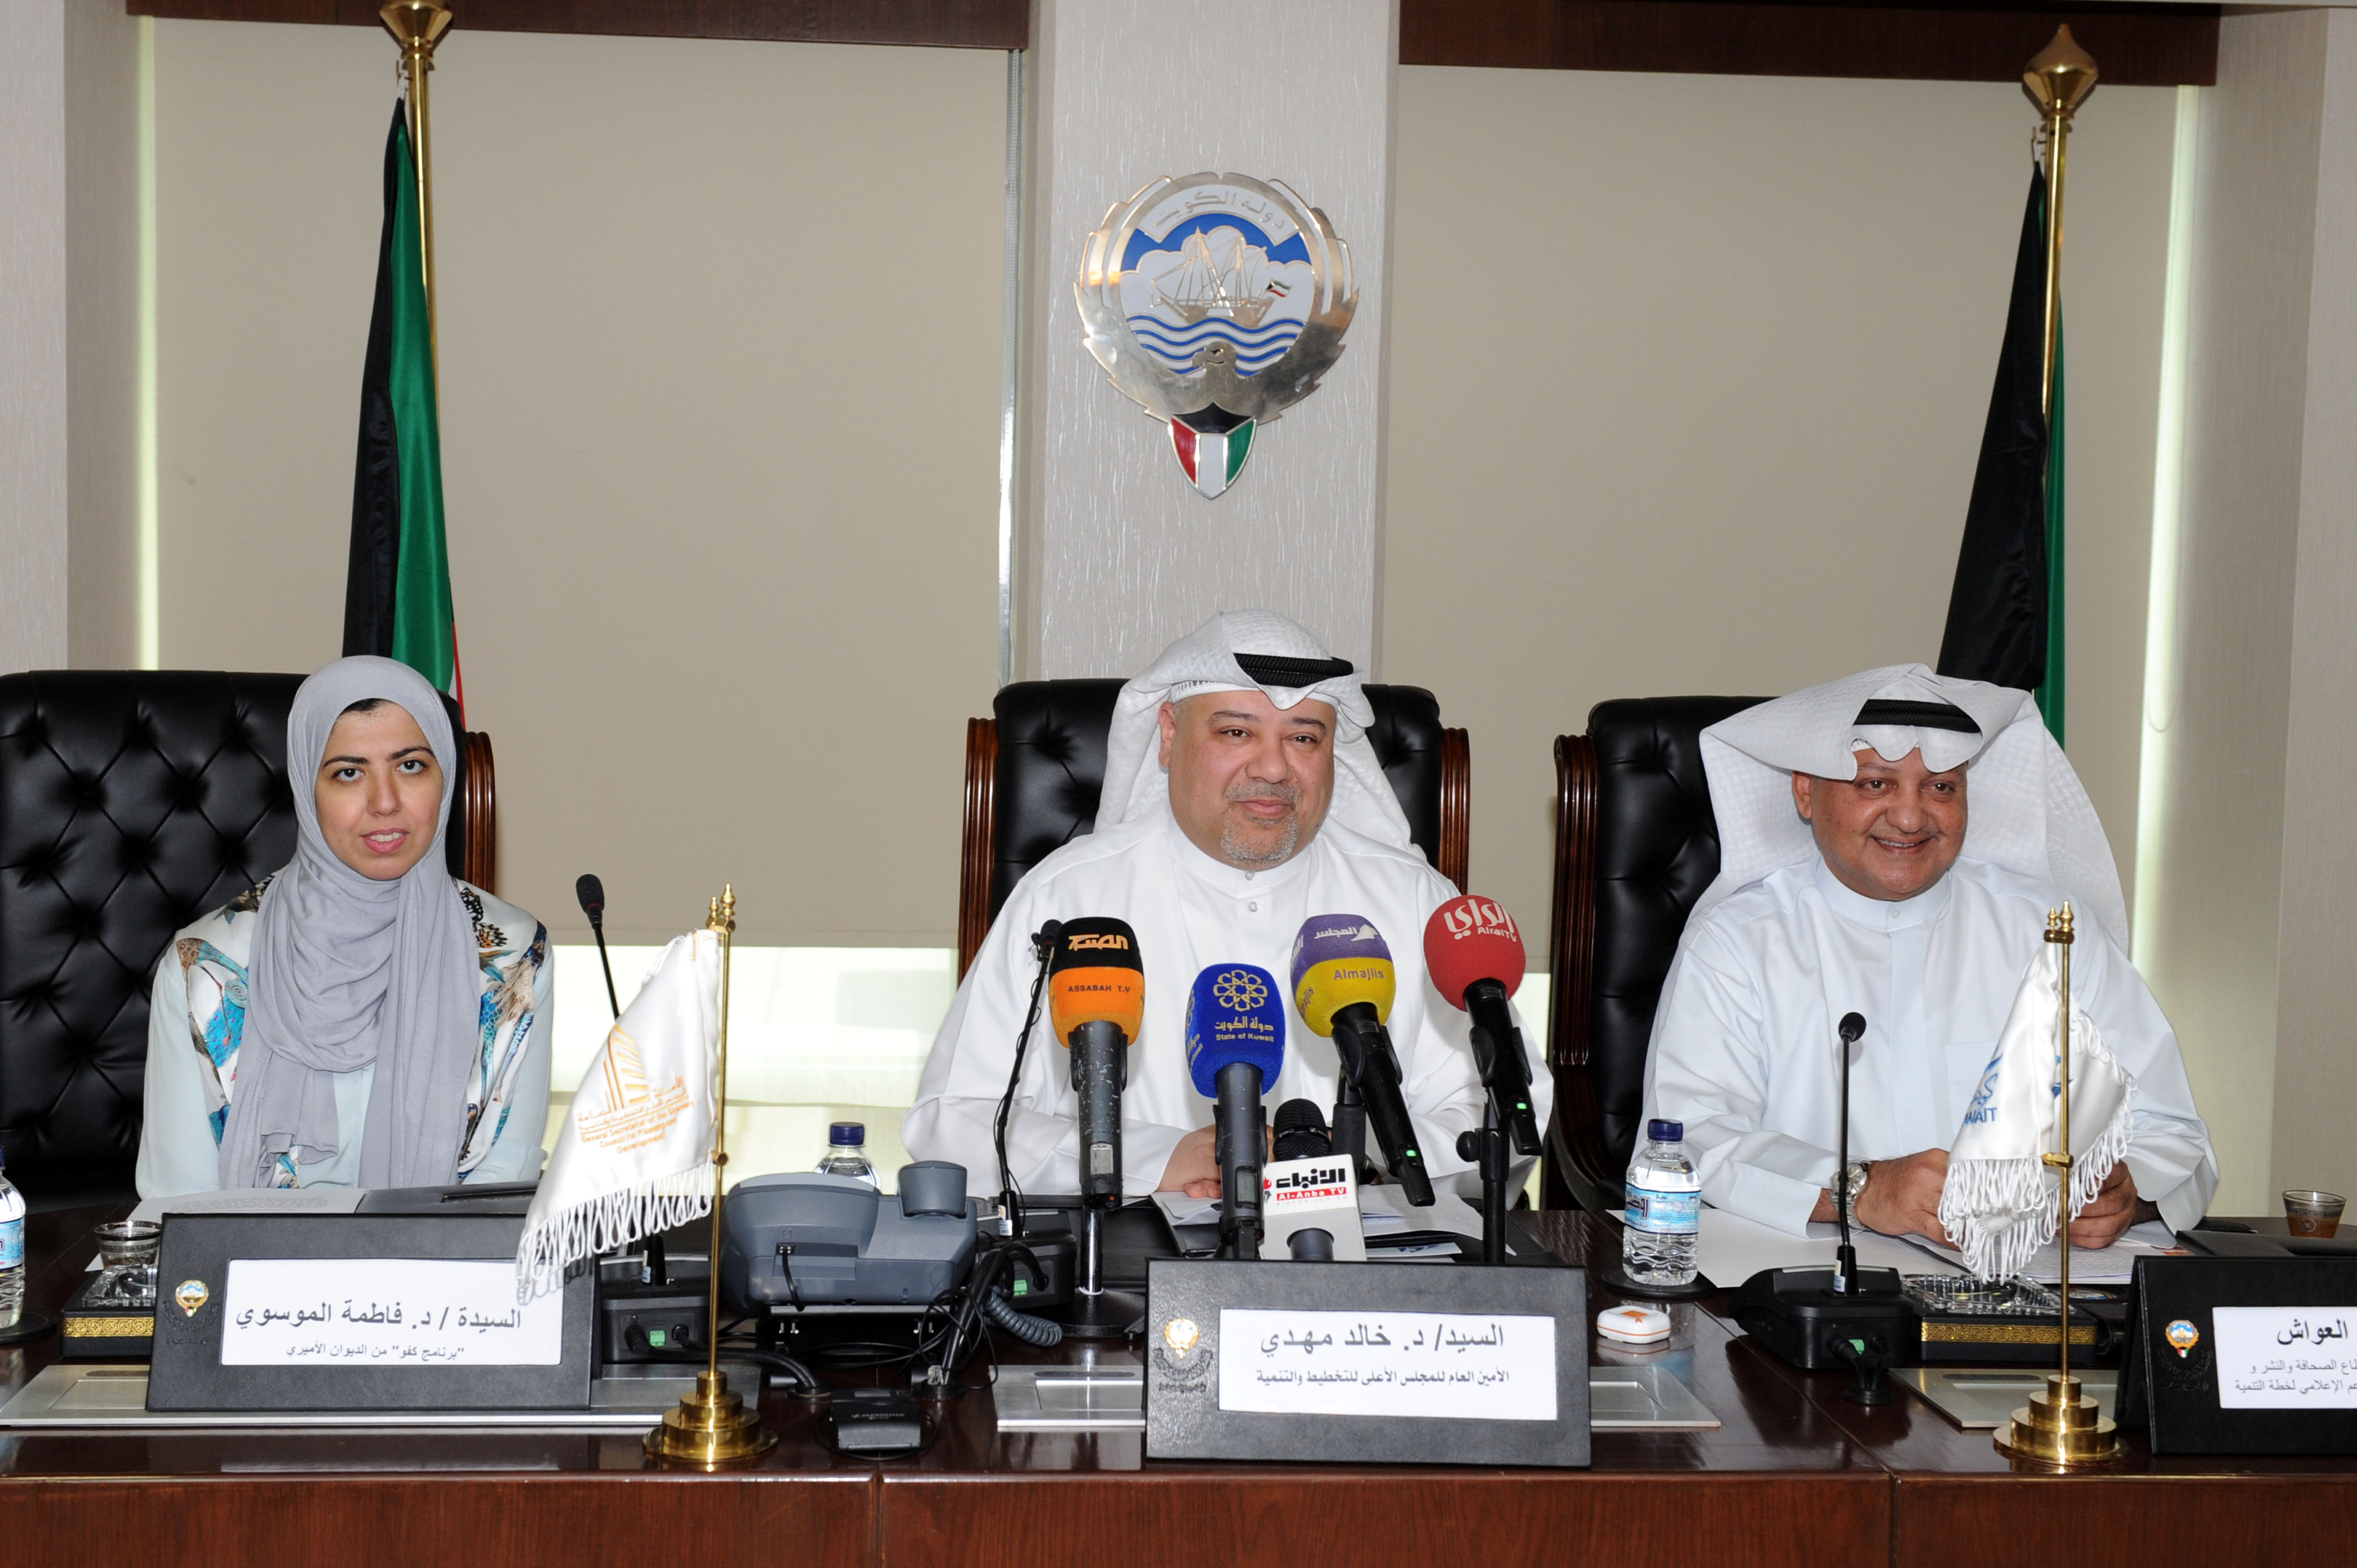 Kuwaiti official stresses importance of involving community into new Kuwait 2035 vision